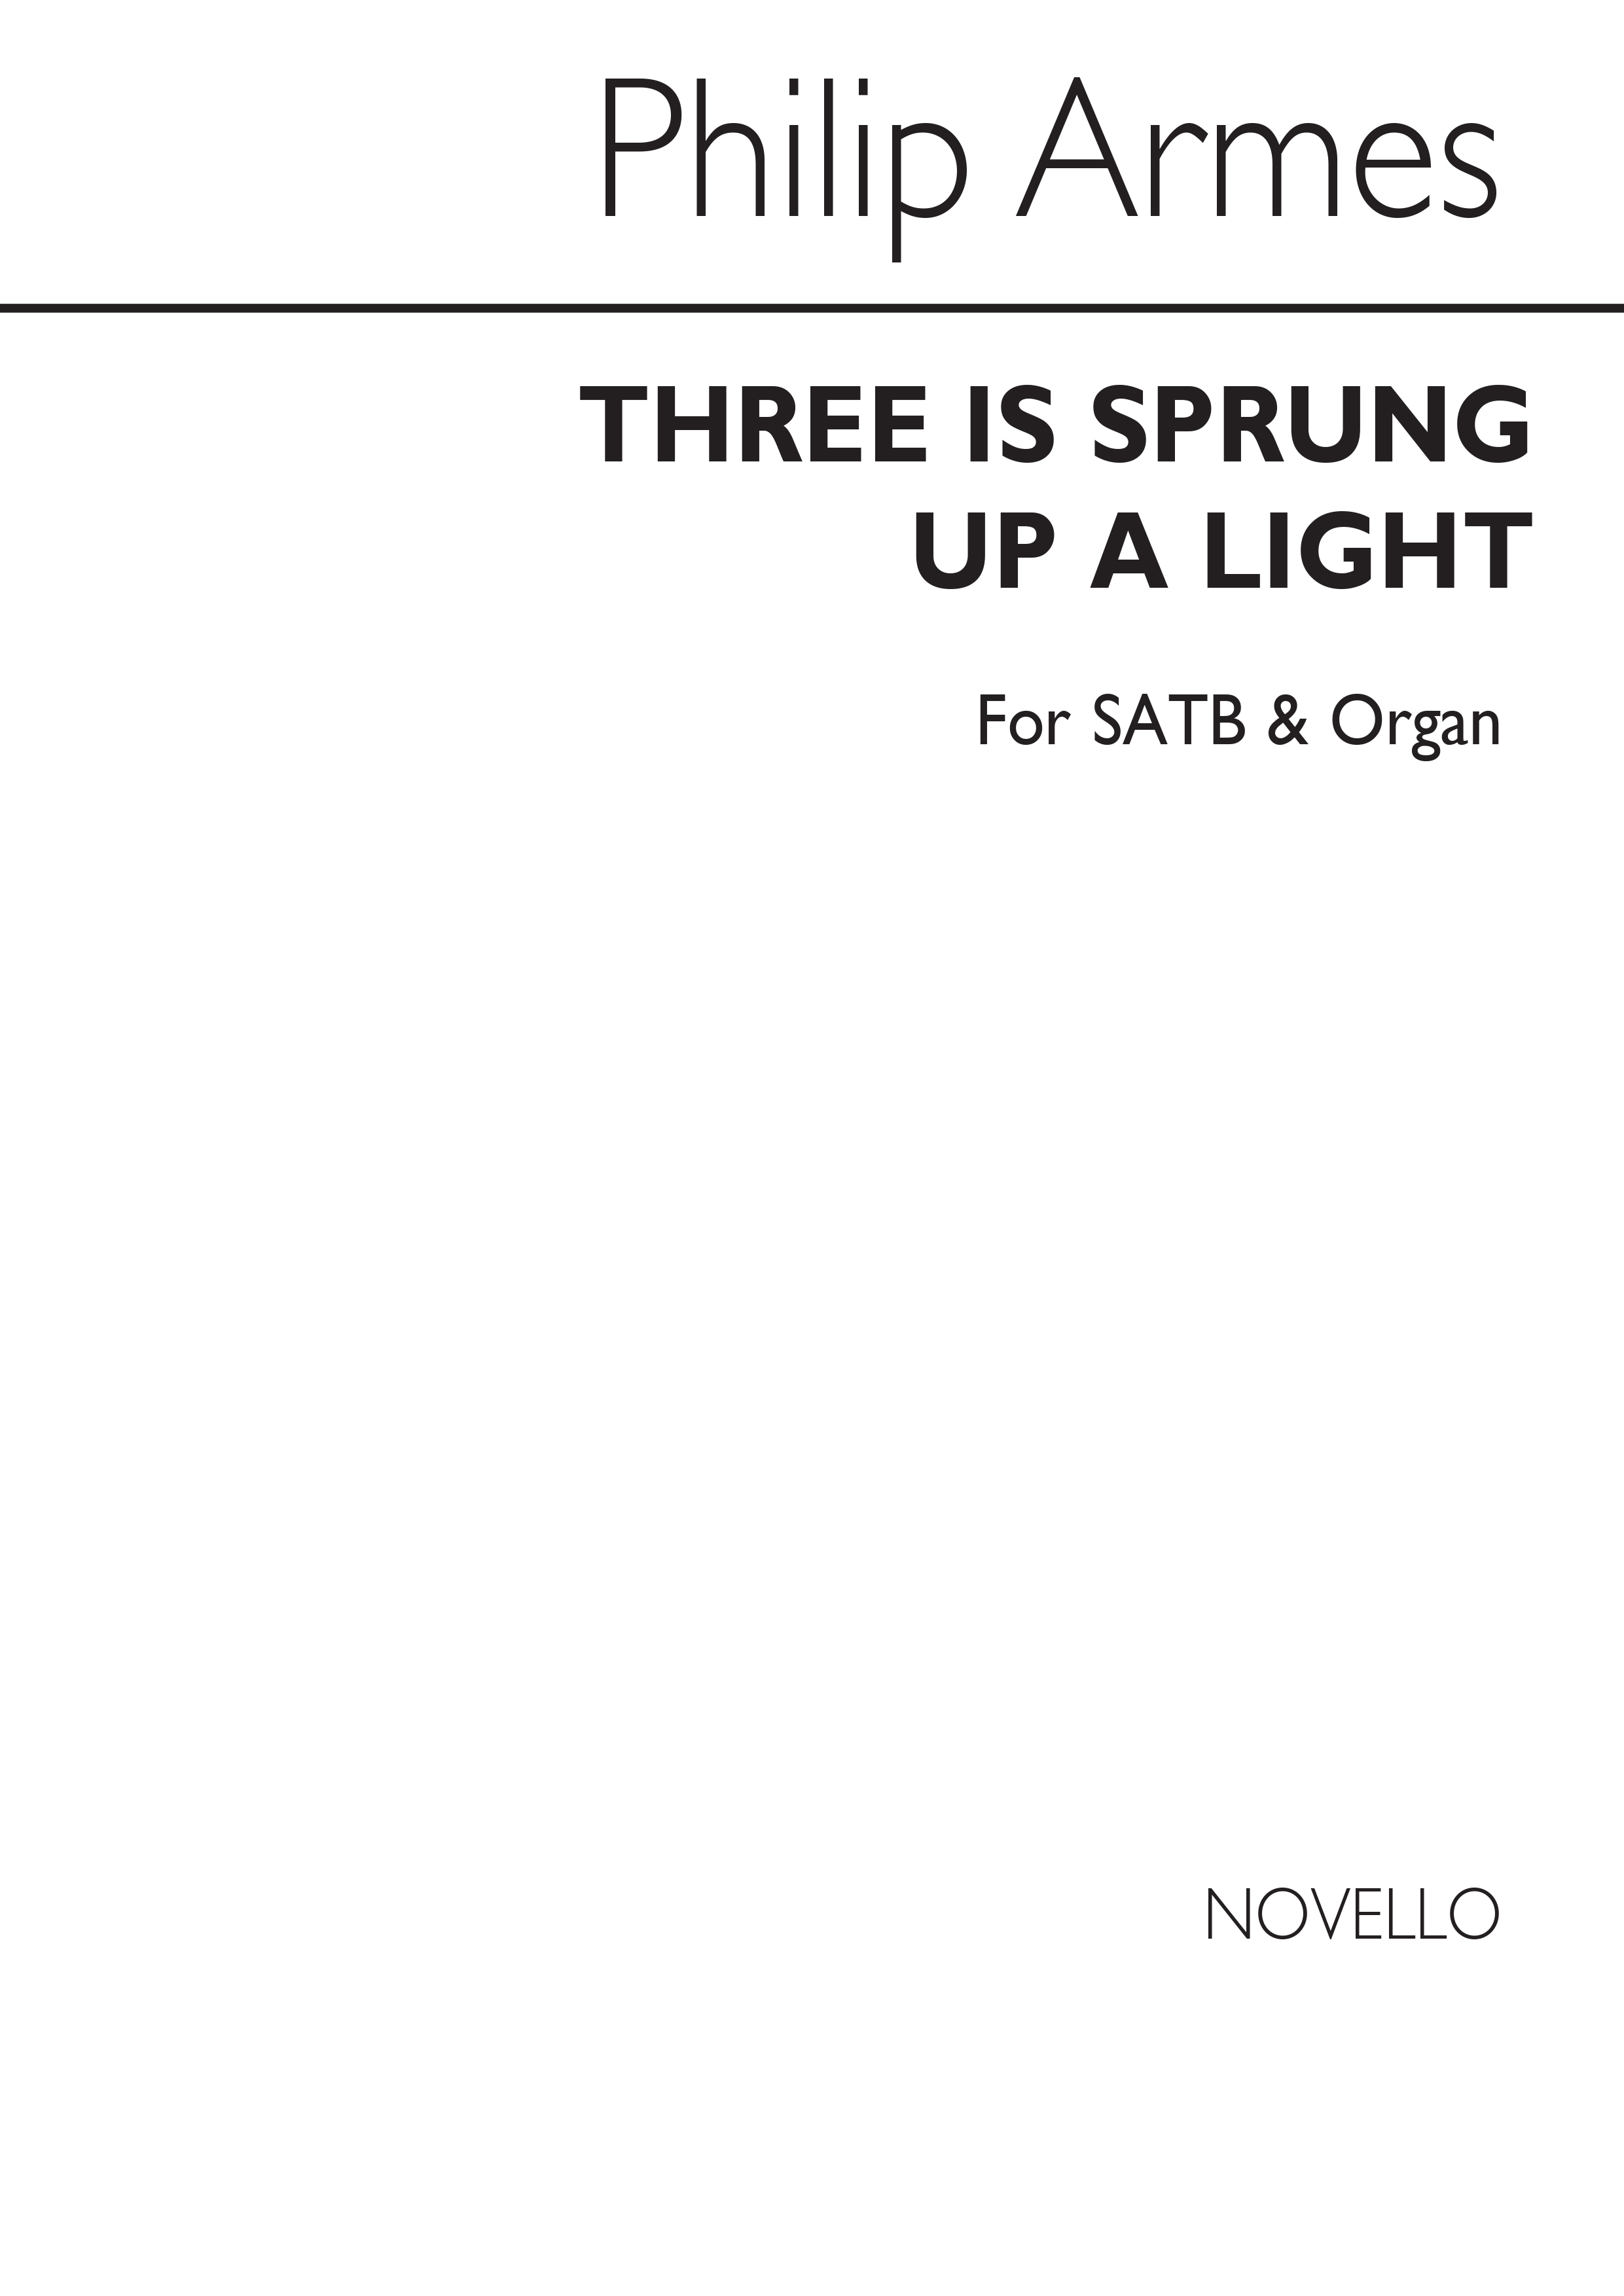 Philip Armes: There Is Sprung Up A Light Satb/Organ